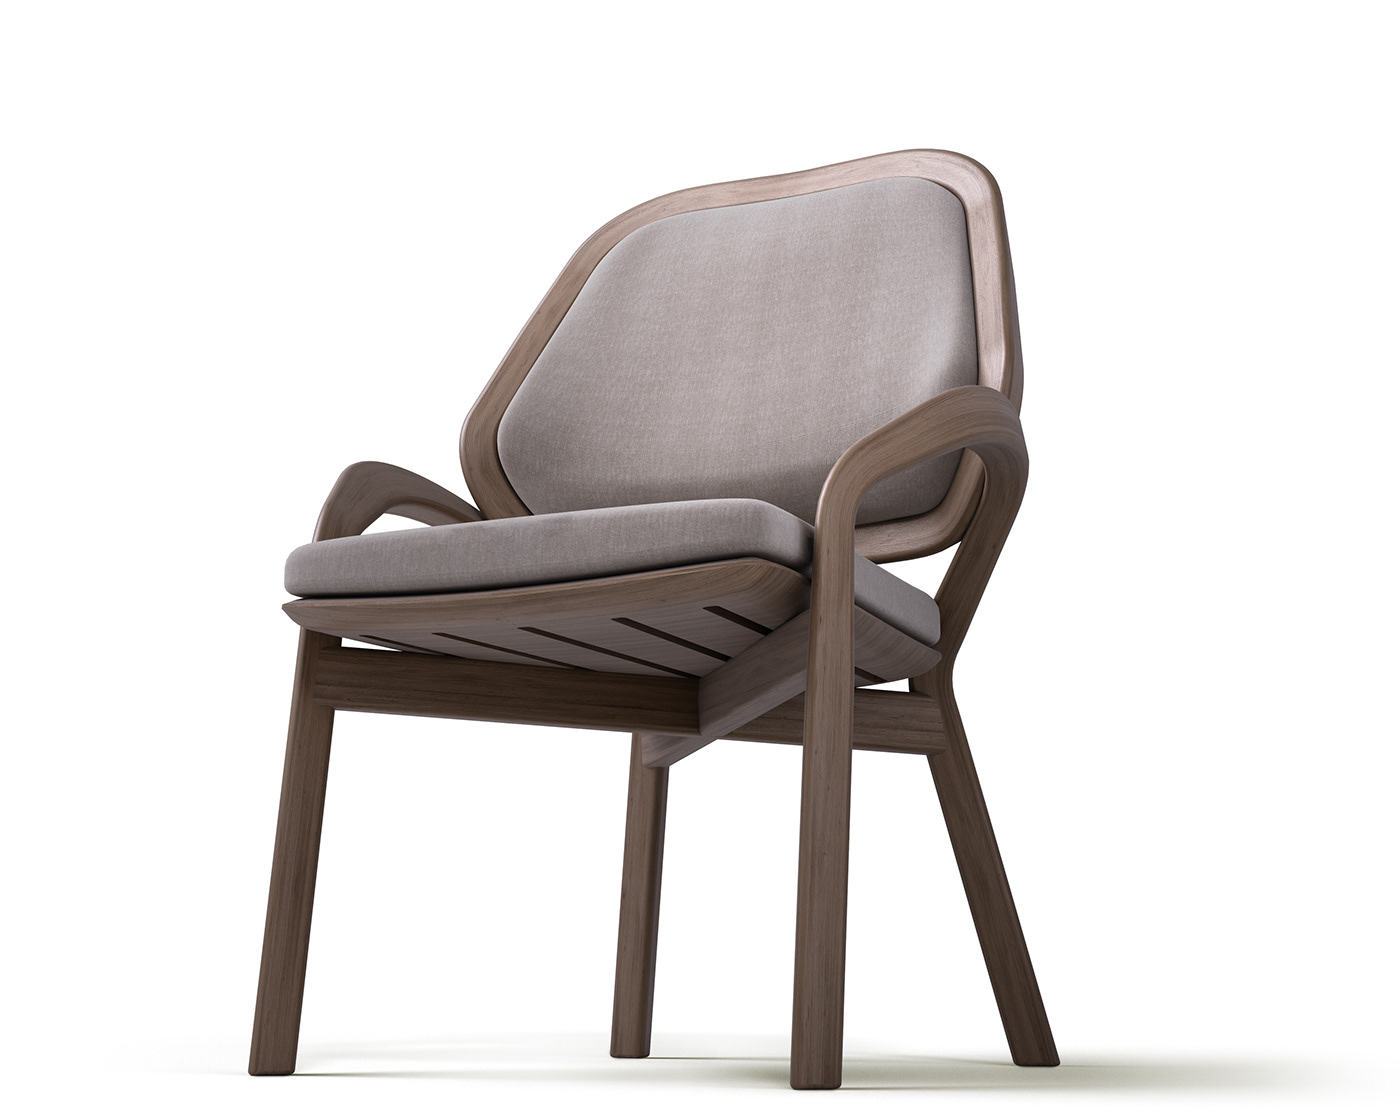 furniture modern vray SketchUP Render architecture visualization chair chair design